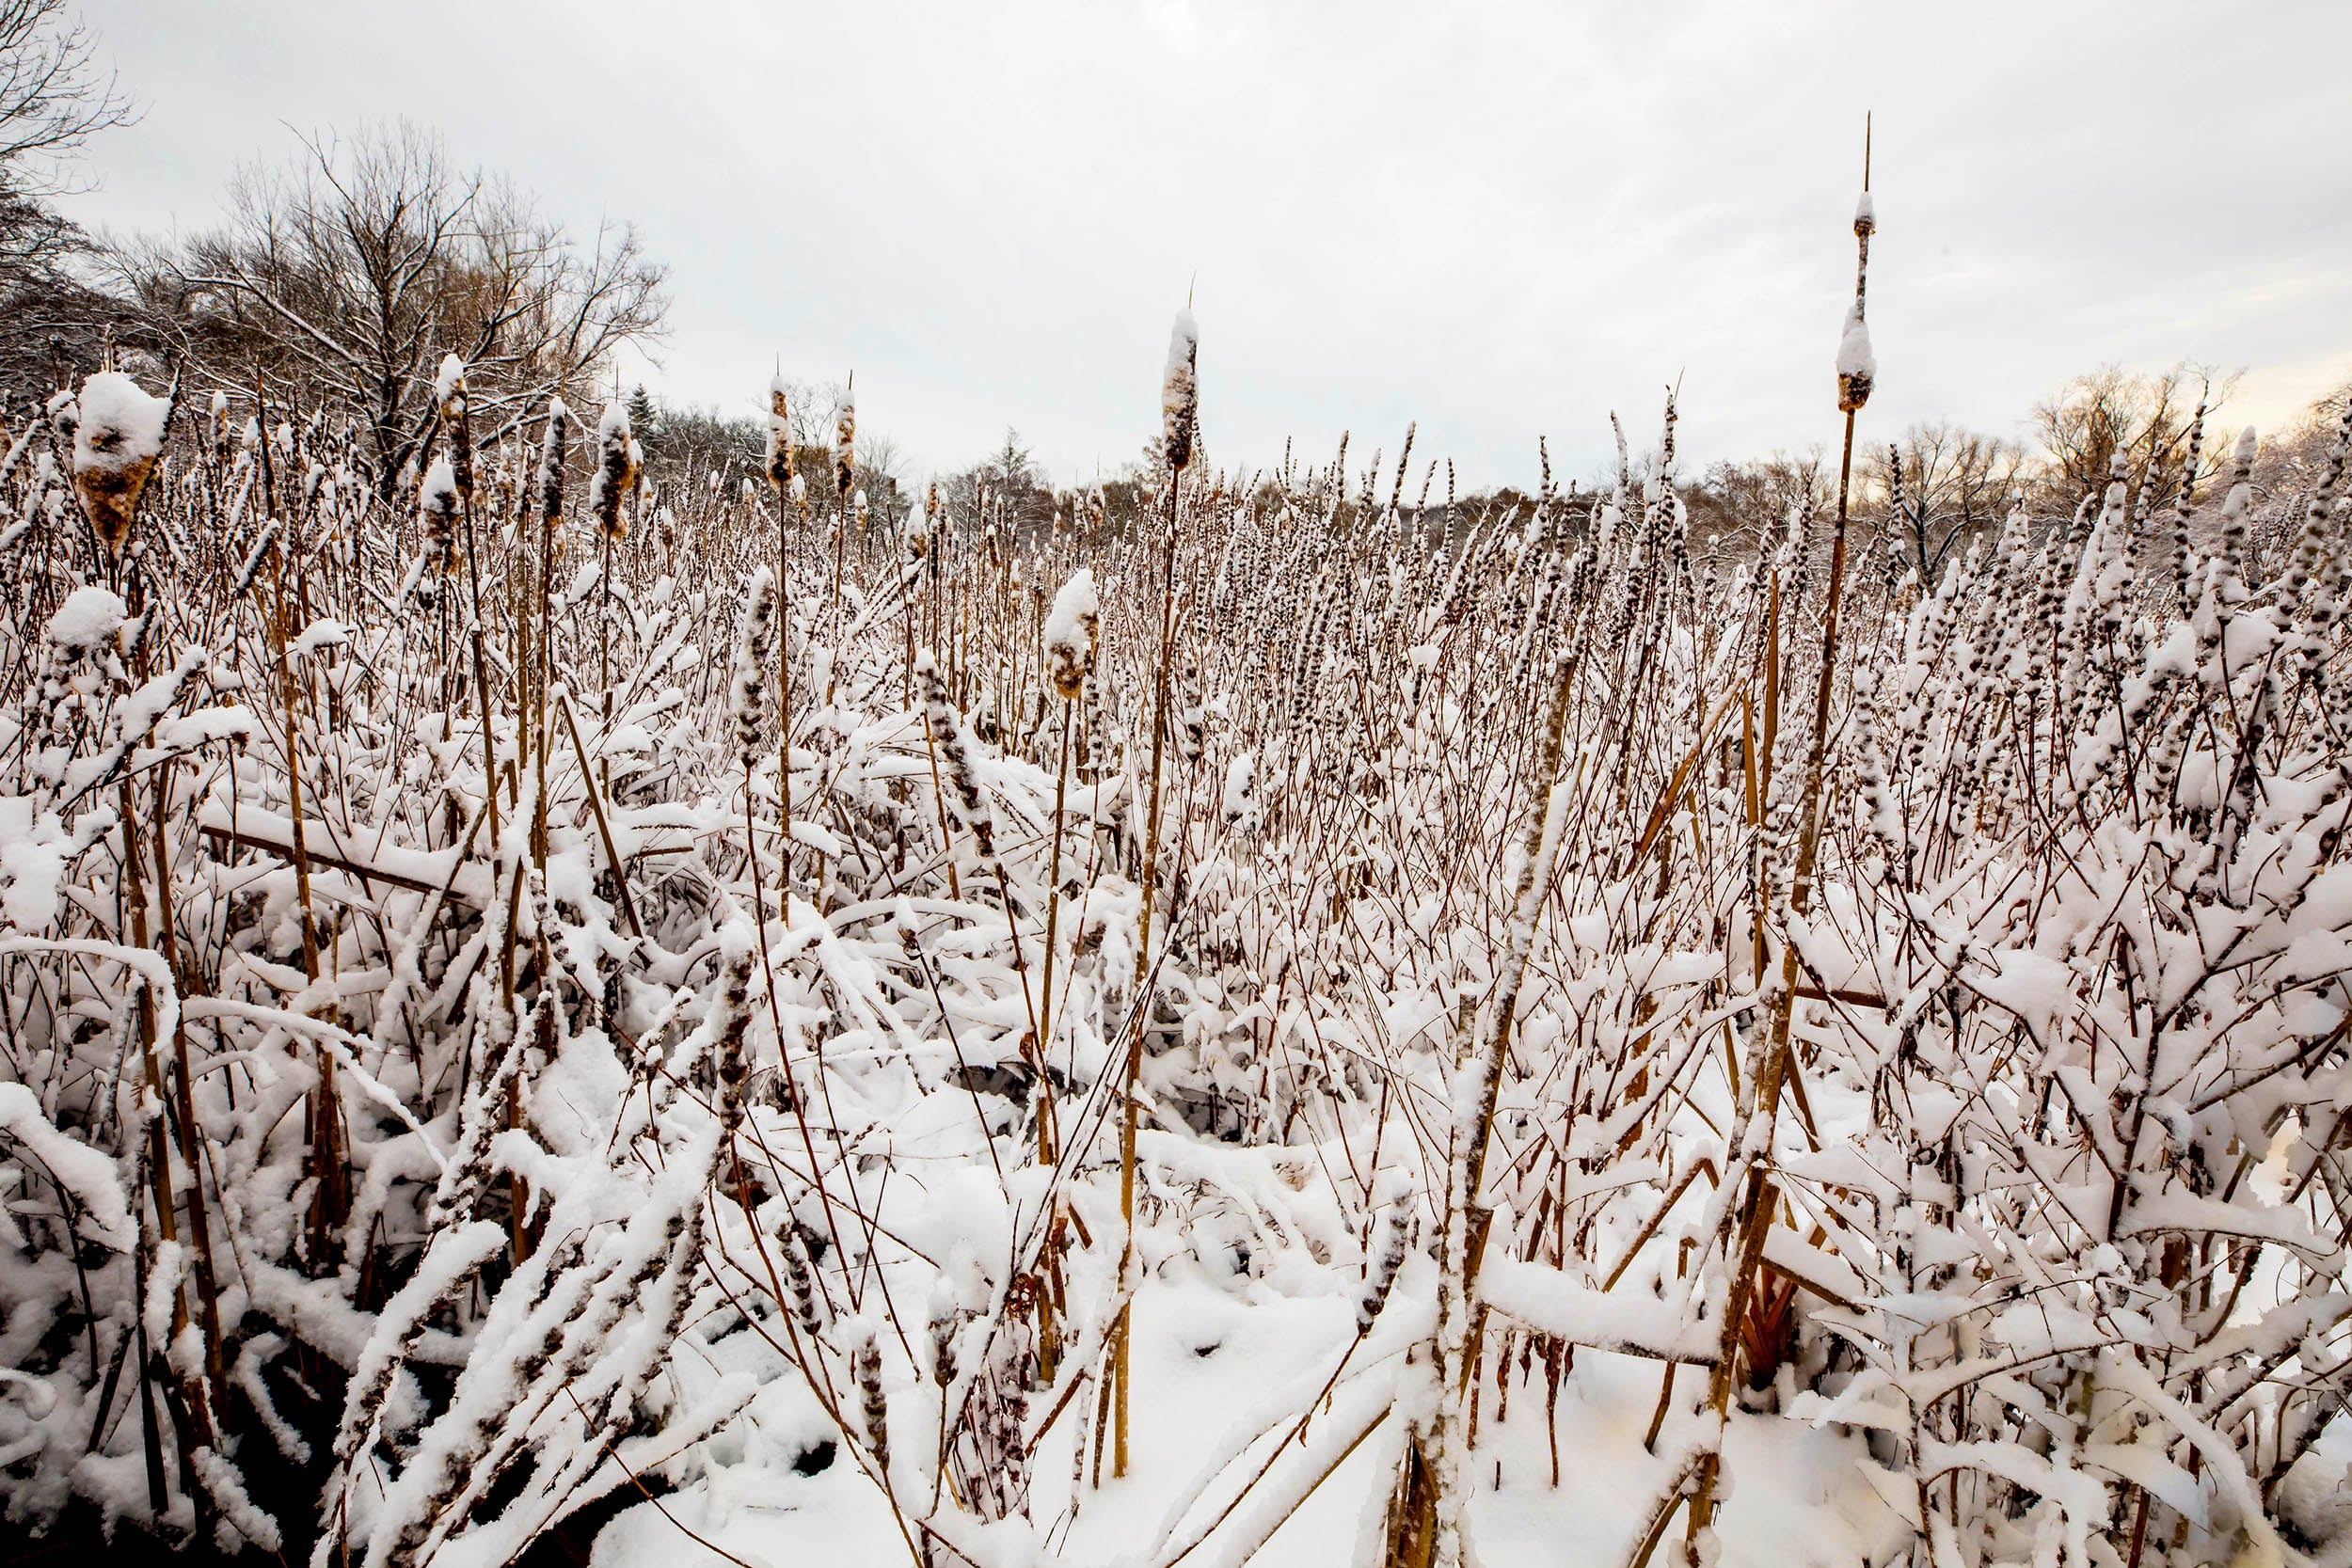 Snow falls on a field of reeds by the Arborway Gate.